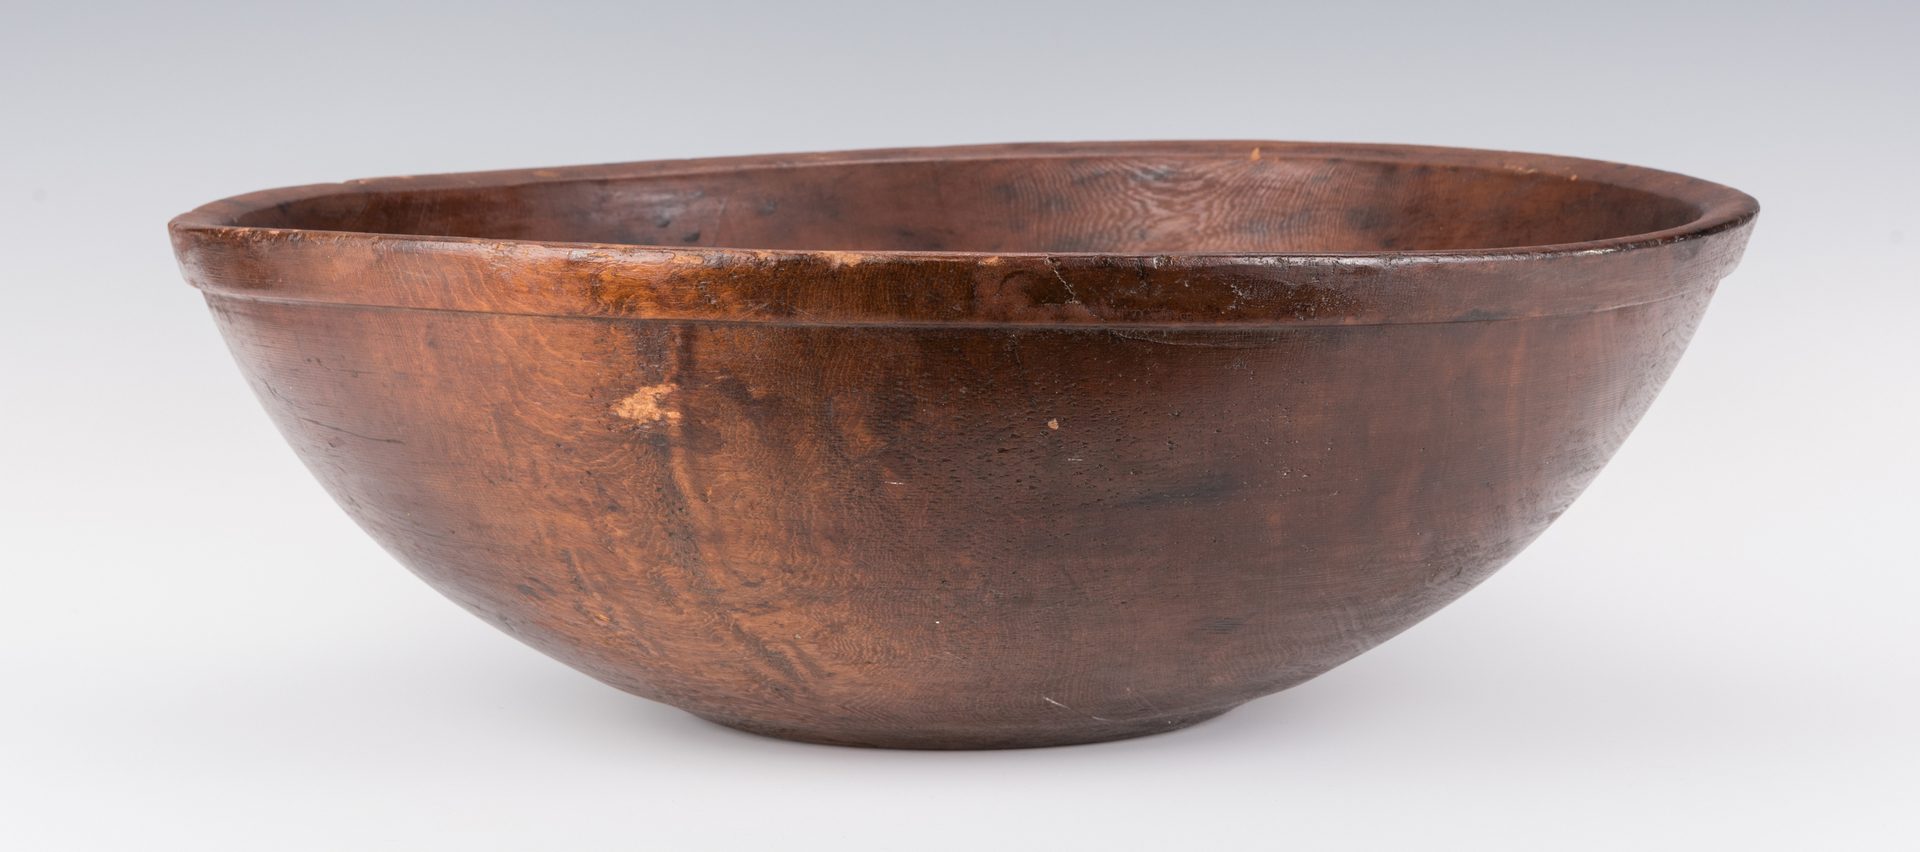 Lot 226: Large Turned Wooden Bowl, American